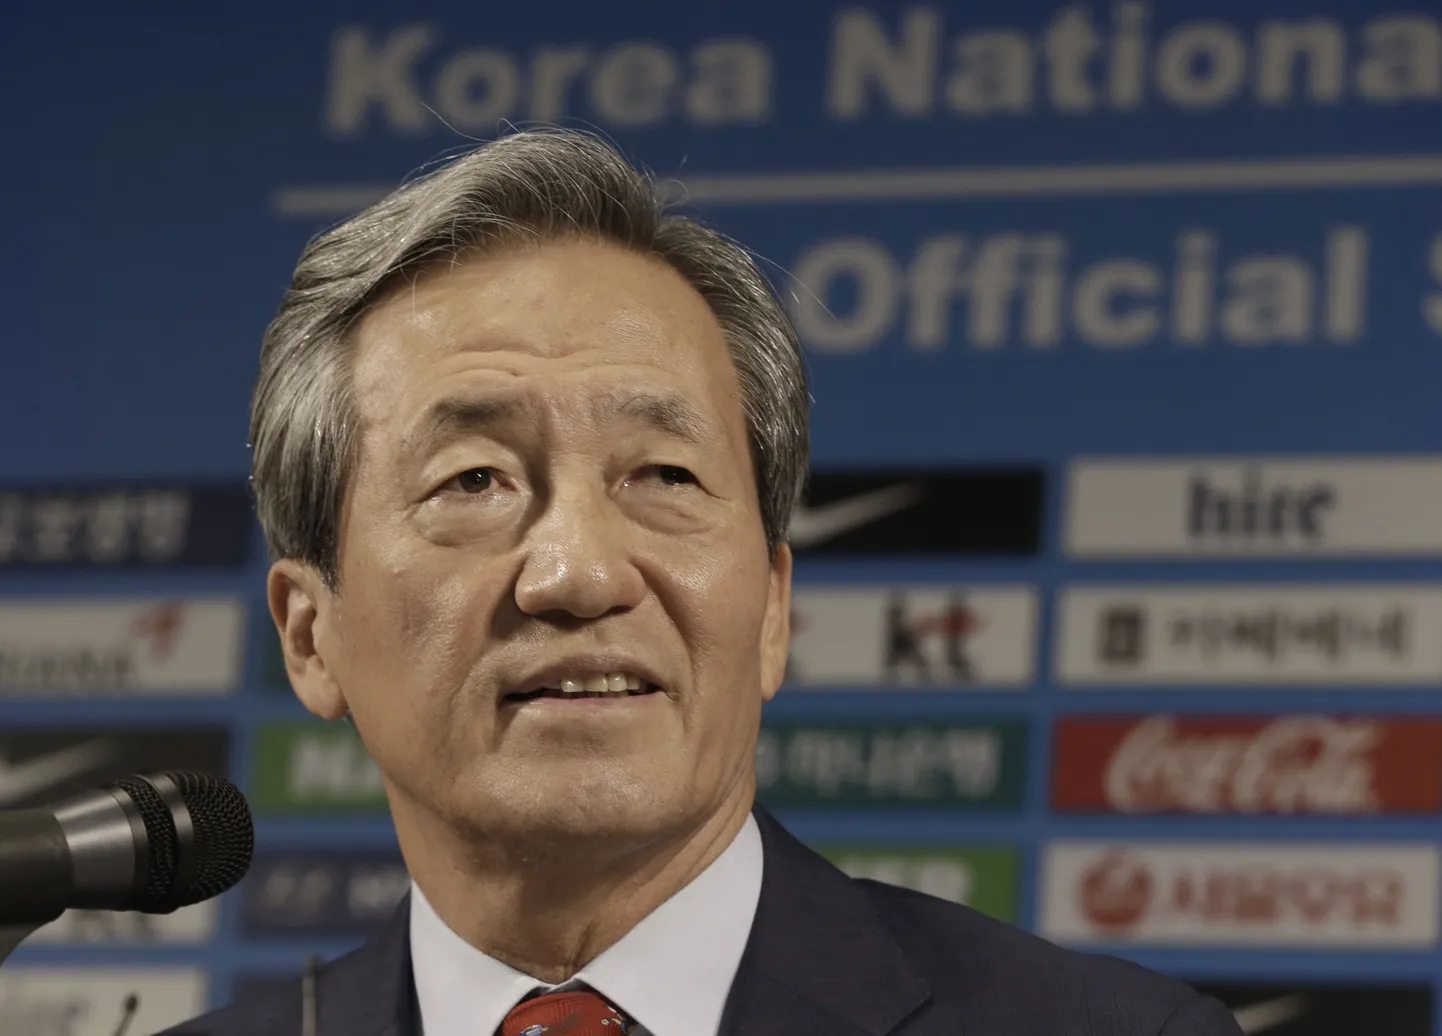 South Korean FIFA presidential candidate Chung Mong-joon speaks during a news conference in Seoul, South Korea, Thursday, Sept. 3, 2015. Chung accused the Asian Football Confederation of breaking rules by lobbying for rival candidate Michel Platini in the upcoming FIFA presidential election. Chung said that the AFC has been sending letters to officials of member federations urging them to vote for the Frenchman on Feb. 26. (AP Photo/Ahn Young-joon)